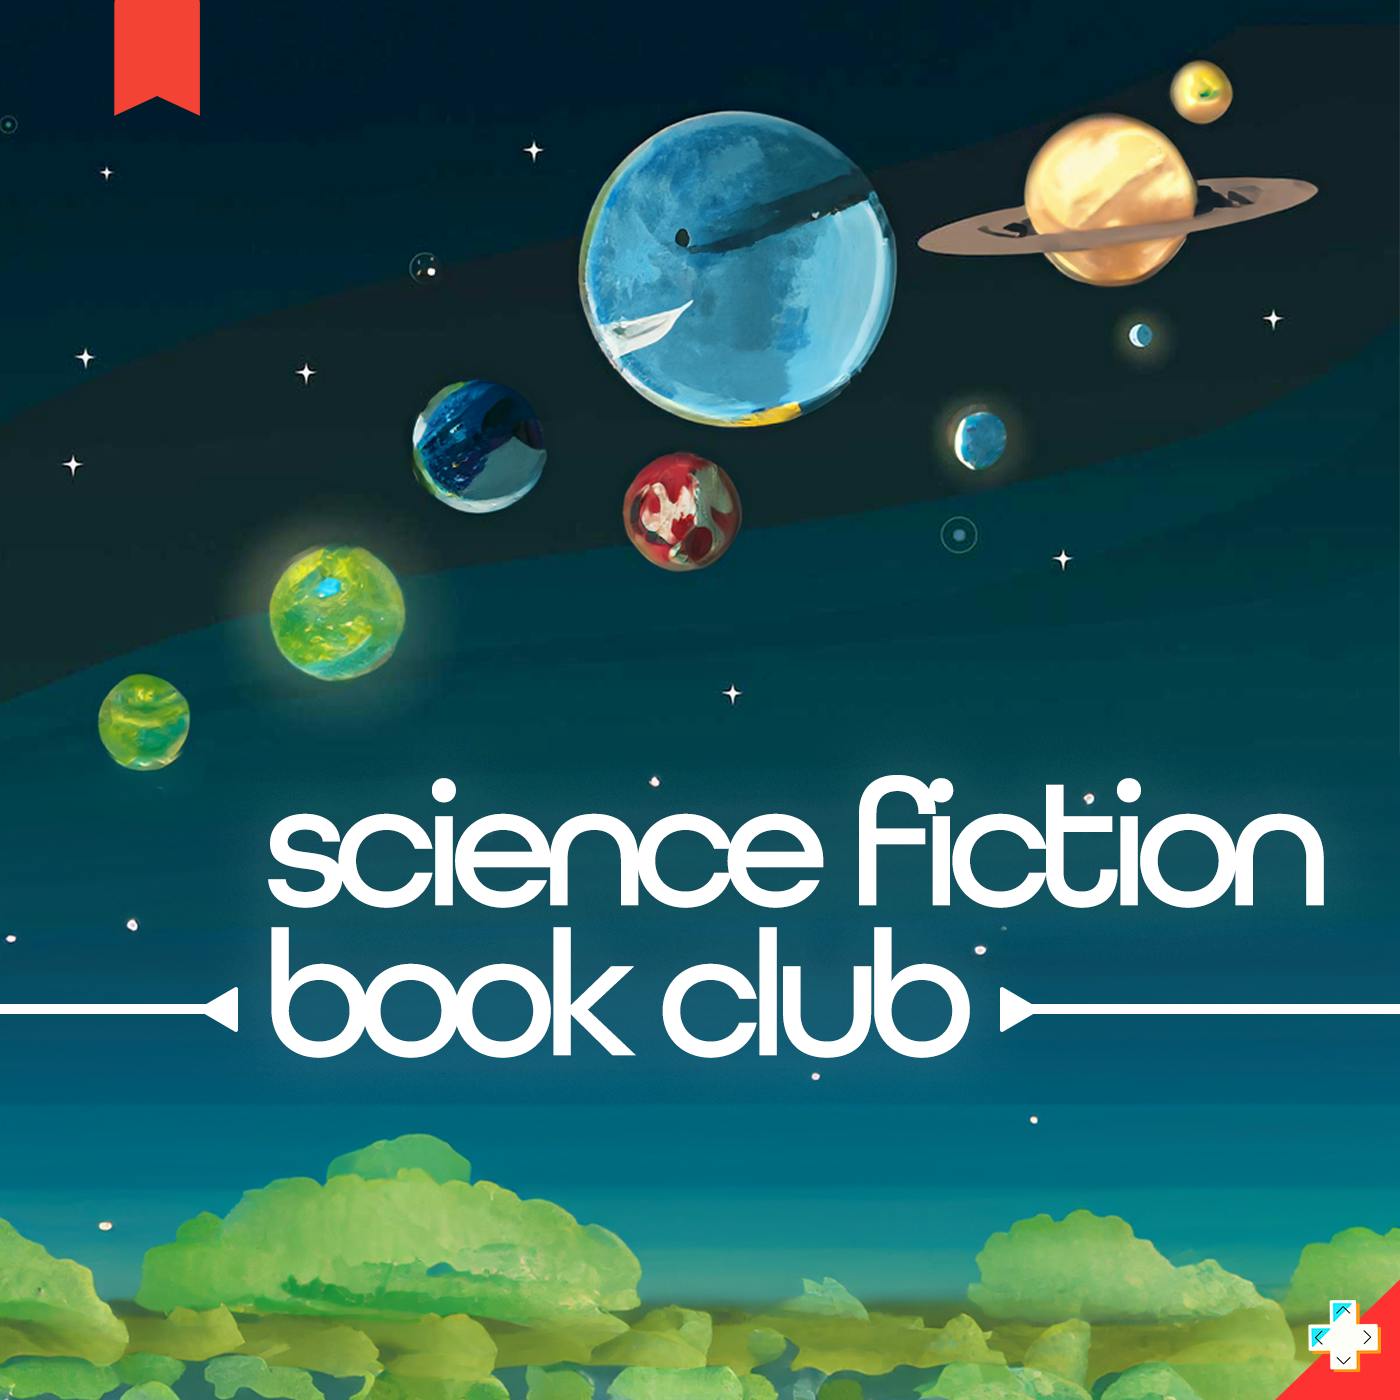 Introducing Science Fiction Book Club